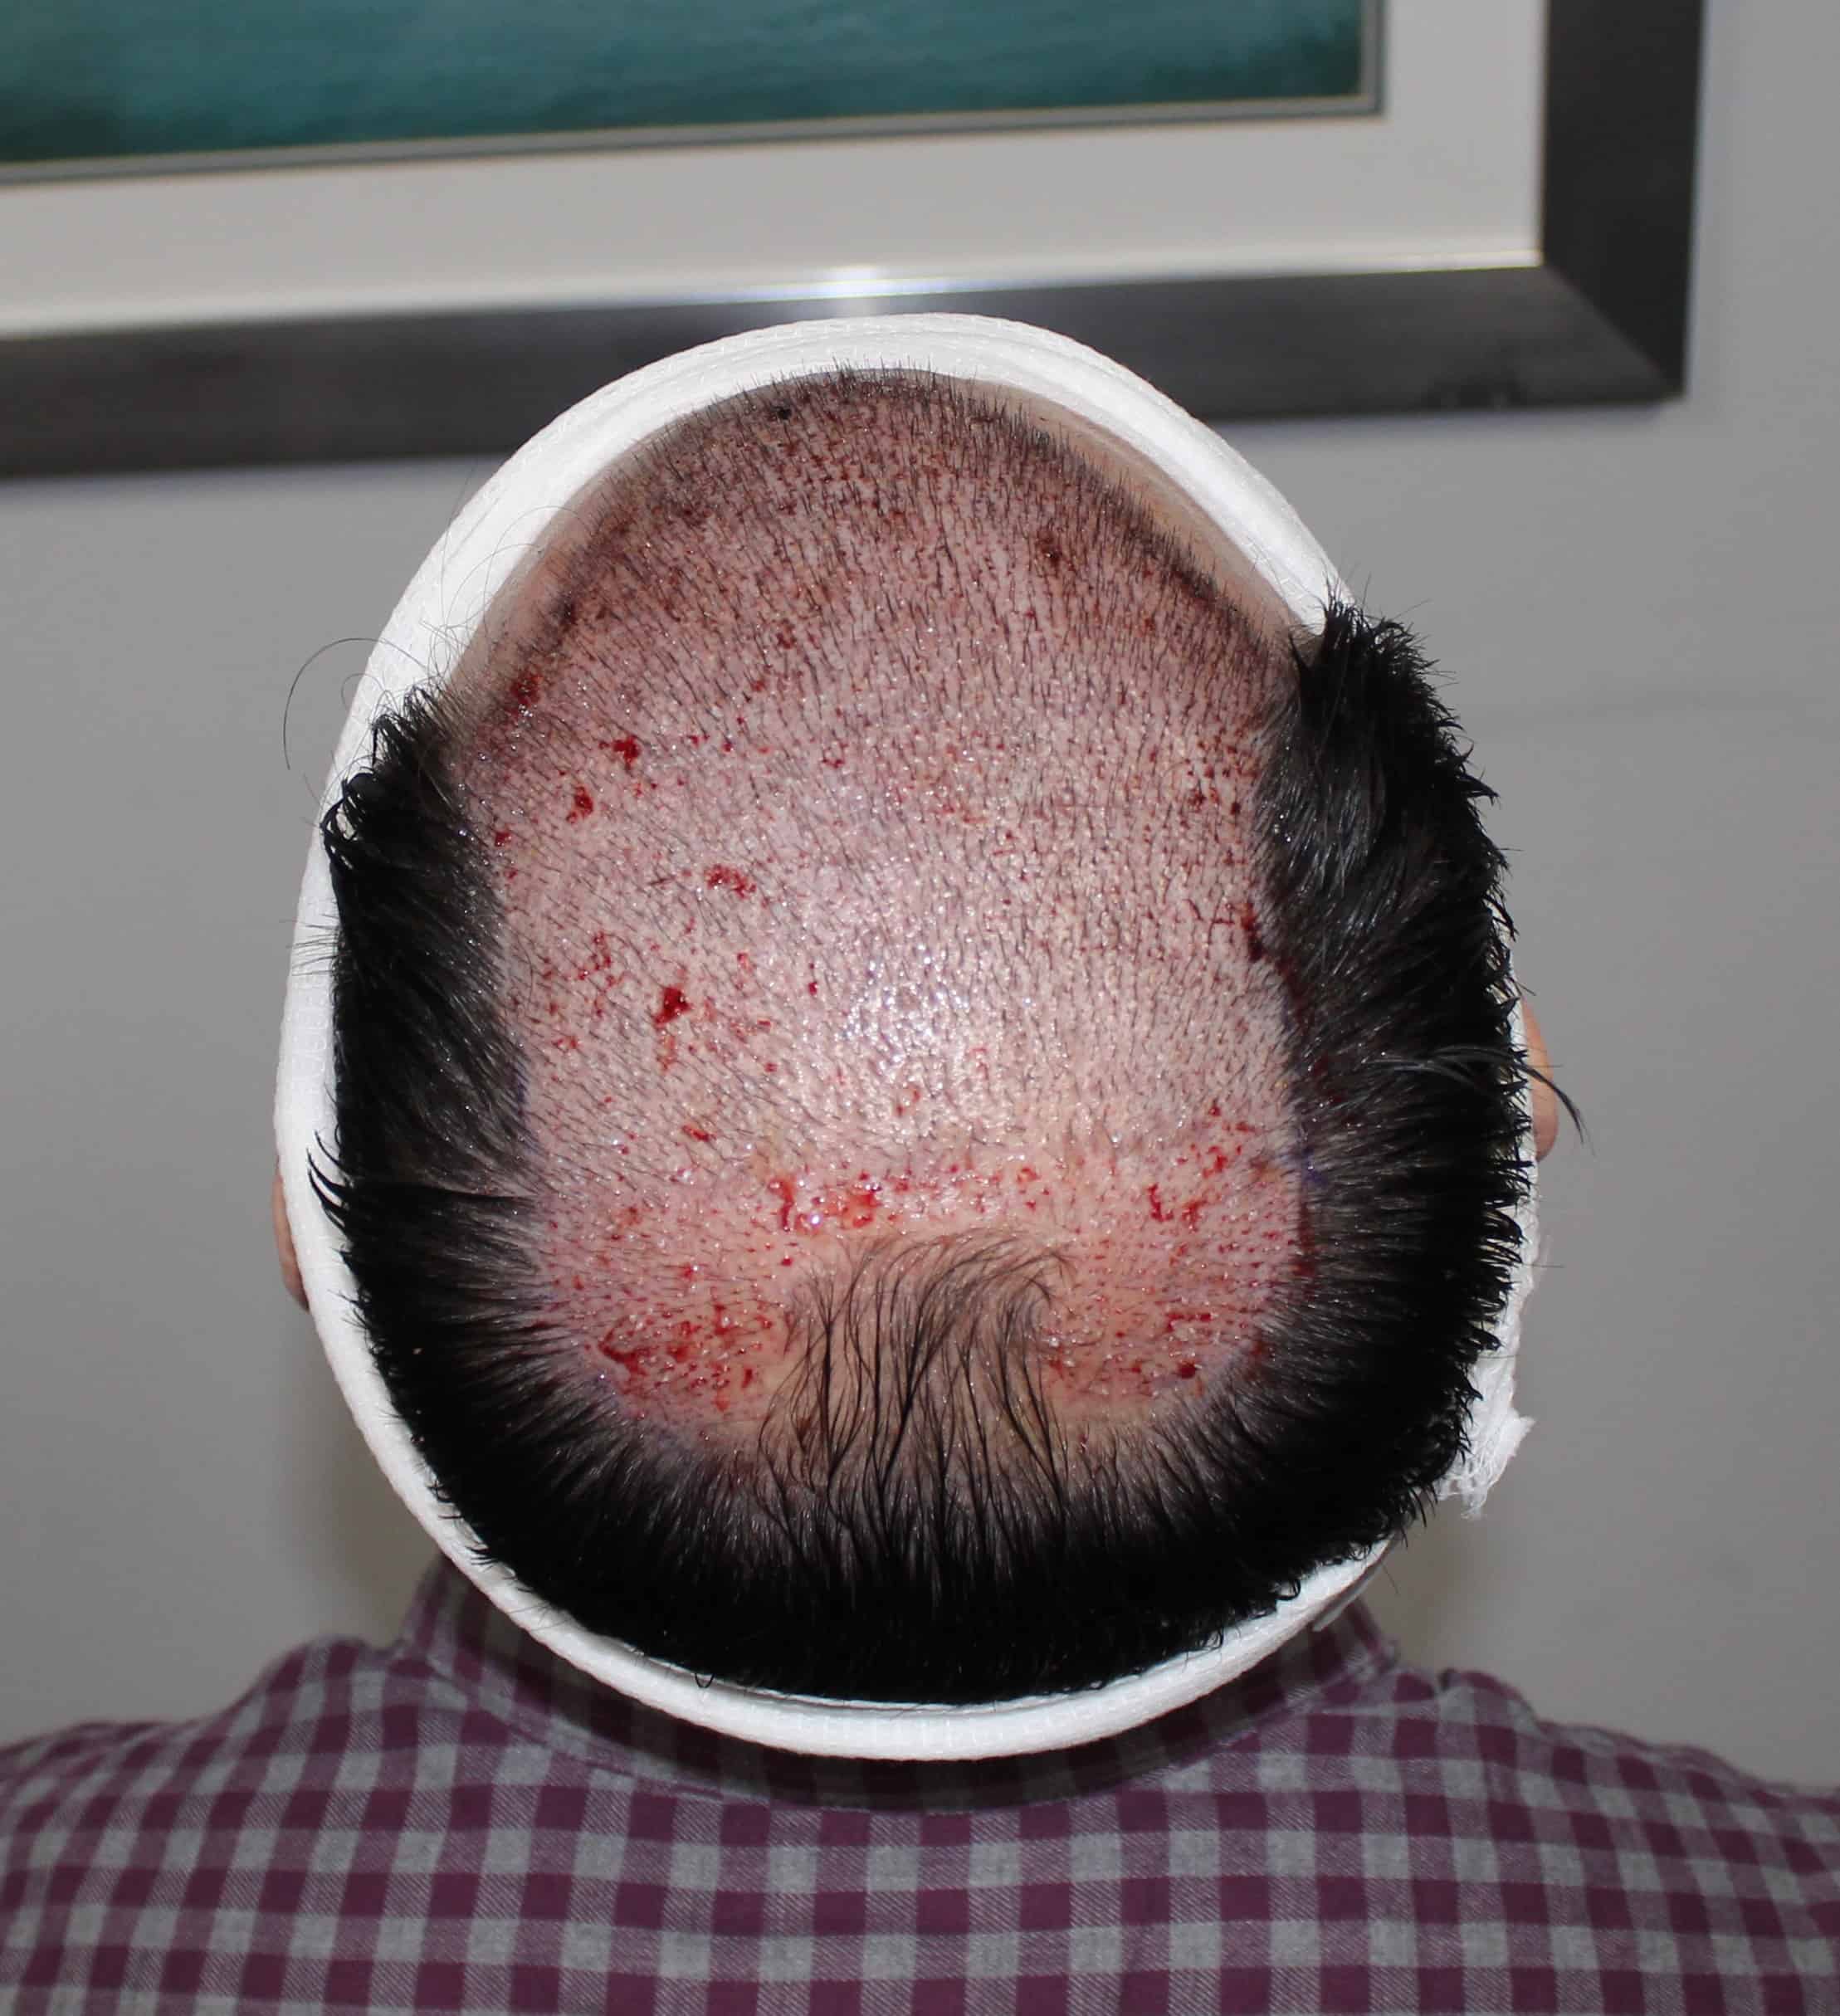 Hair Transplant Death Rate Should You Be Worried